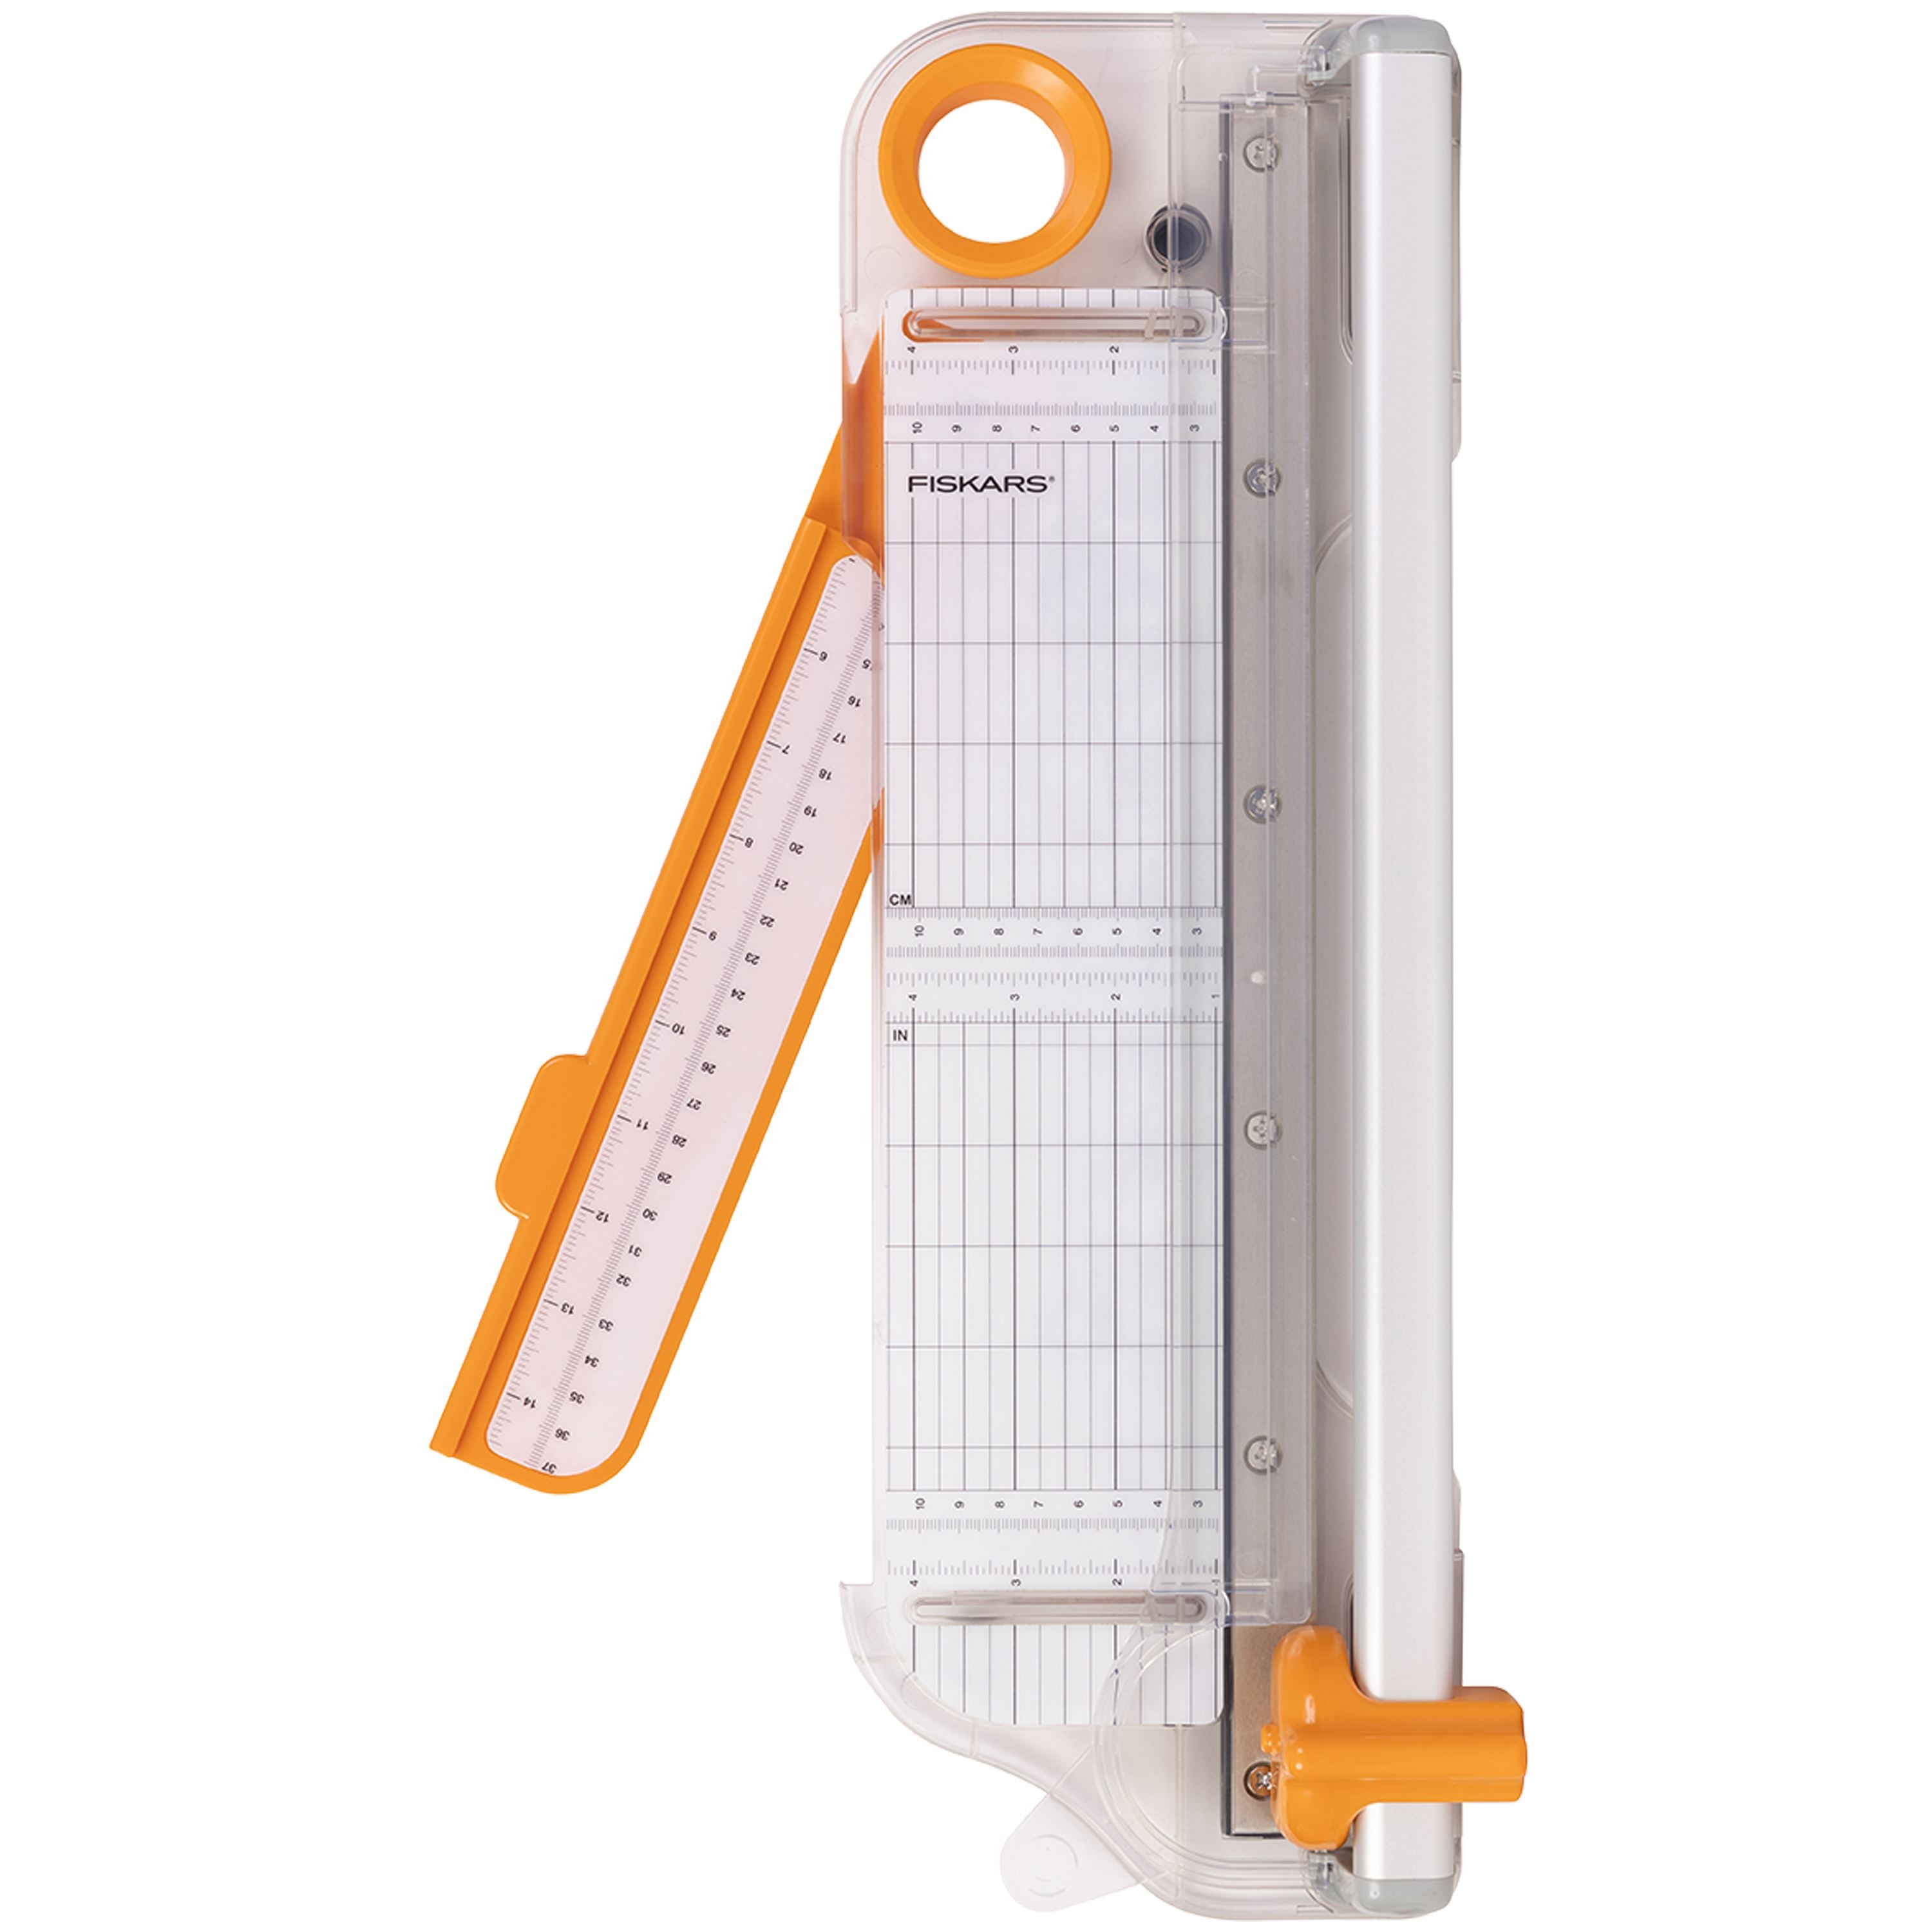 FISKARS DELUXE PORTABLE Trimmer 12 Crafts Paper Cutter Rotary Blade -  Pre-Owned $12.00 - PicClick